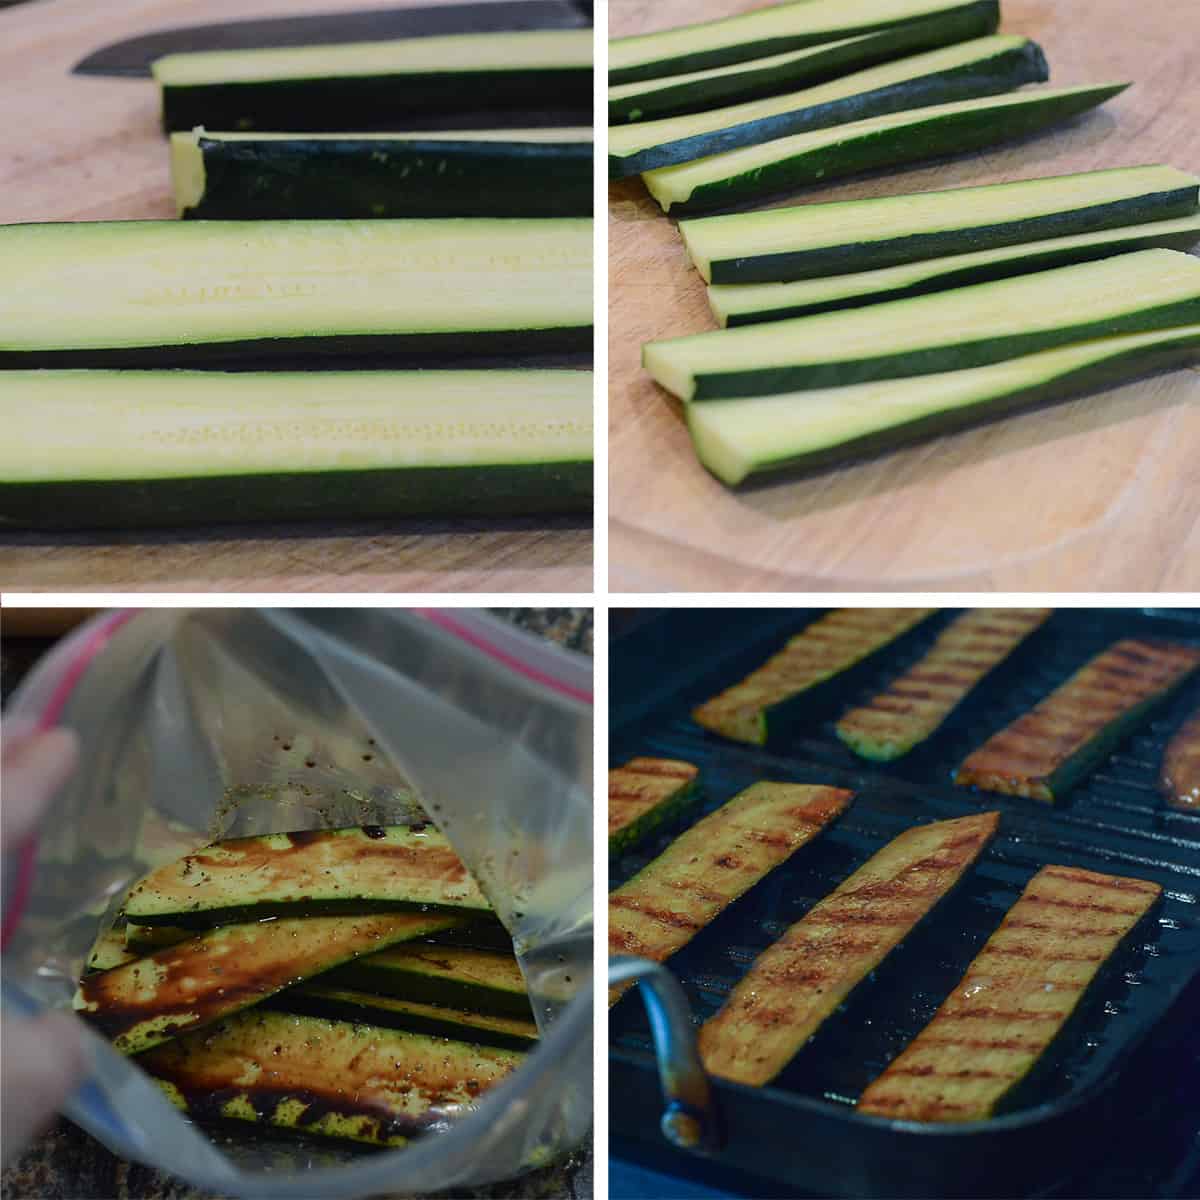 Zucchini is sliced, marinated and grilled.